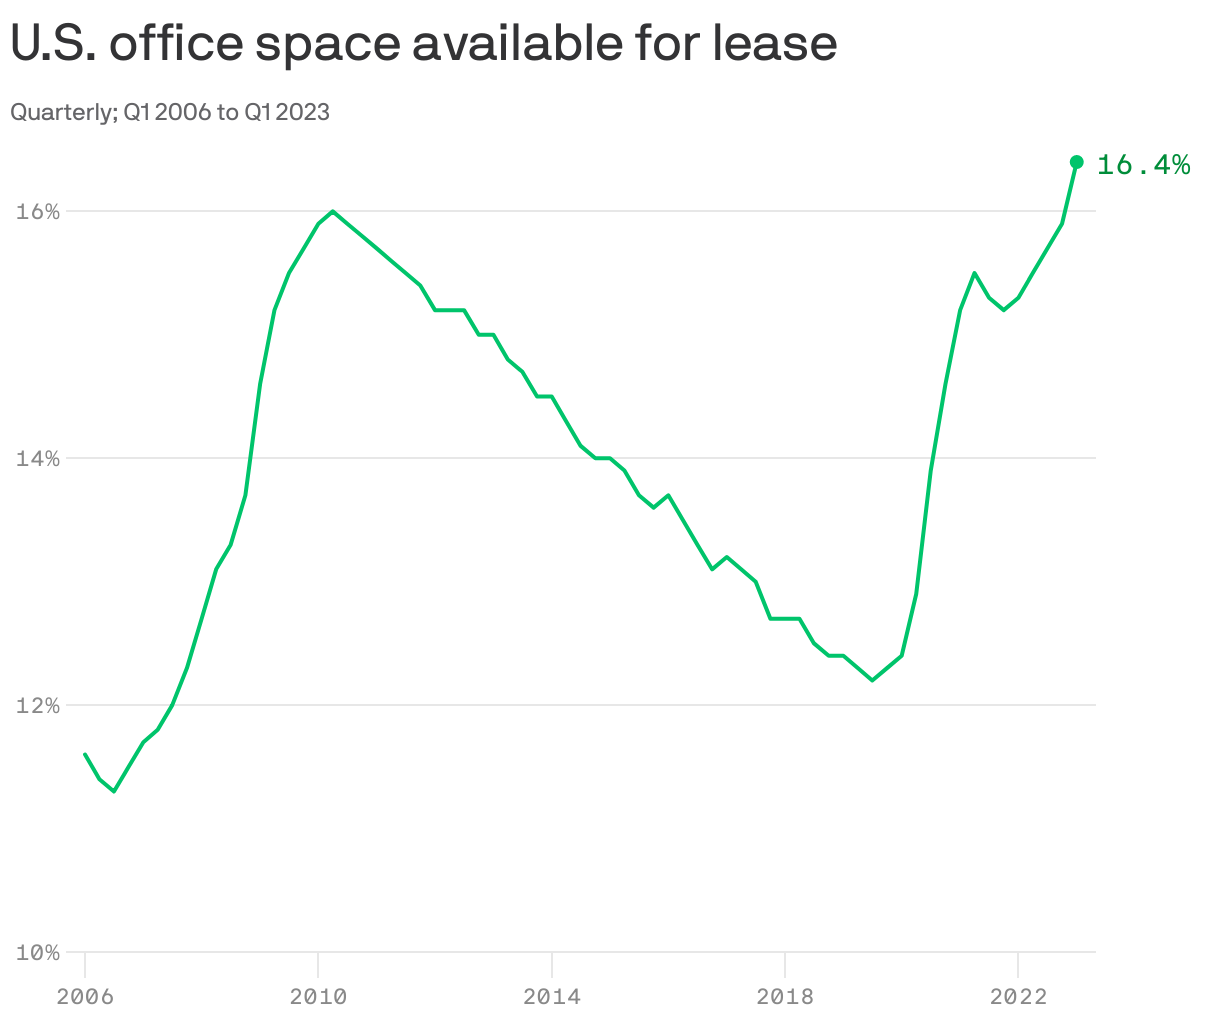 U.S. office space available for lease